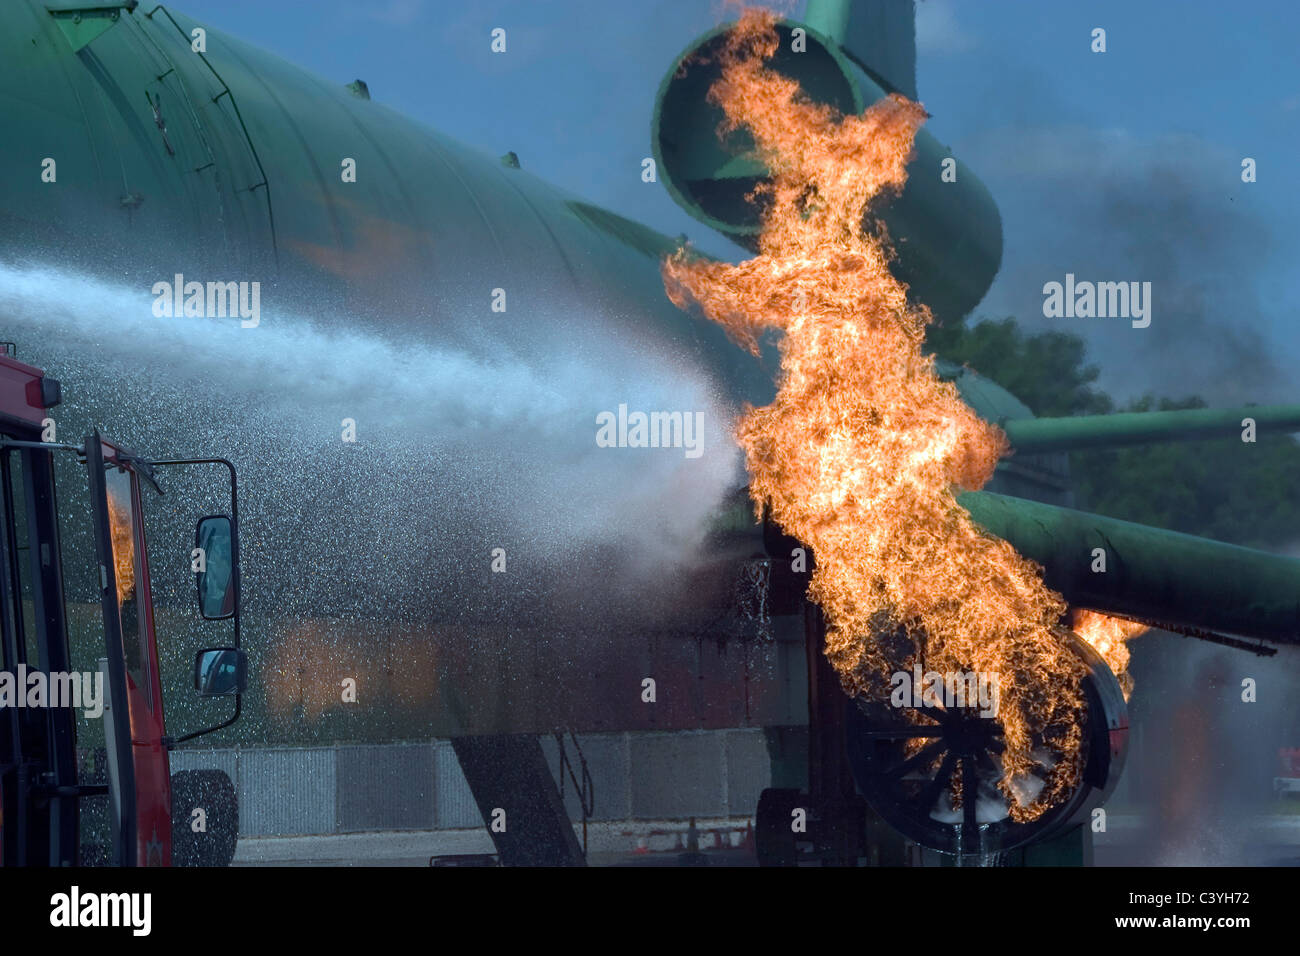 Airport fire service practice extinguishing an engine fire on an aircraft. Stock Photo